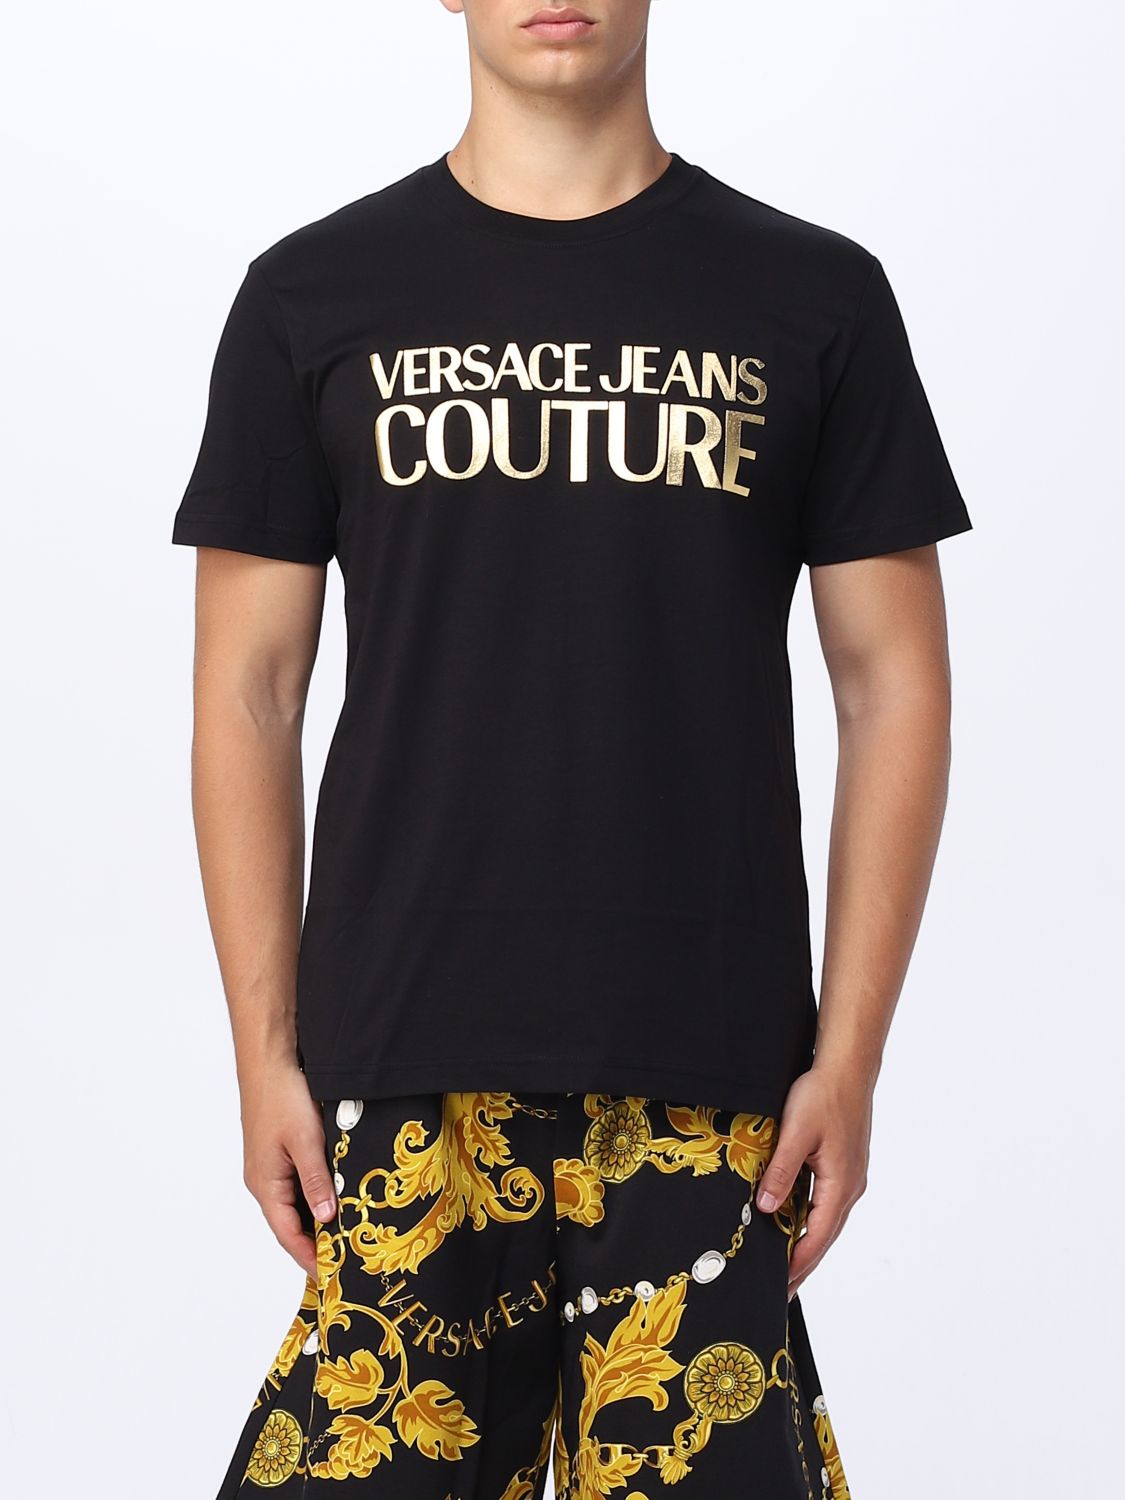 Versace Jeans Couture T-shirt  Men In Black